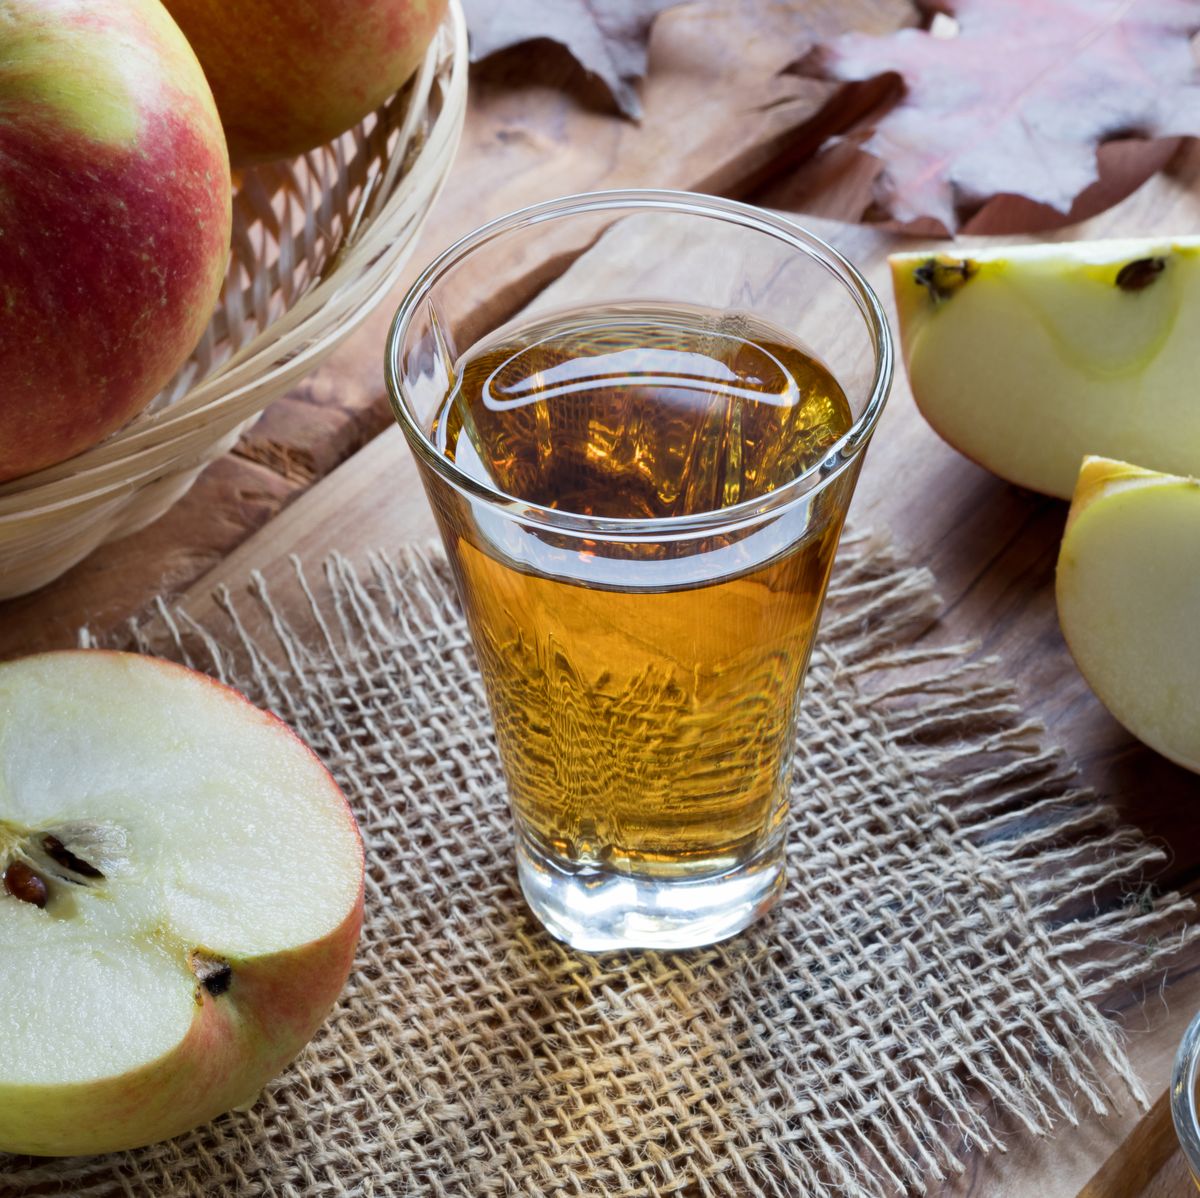 Apple cider vinegar in a glass on a wooden table